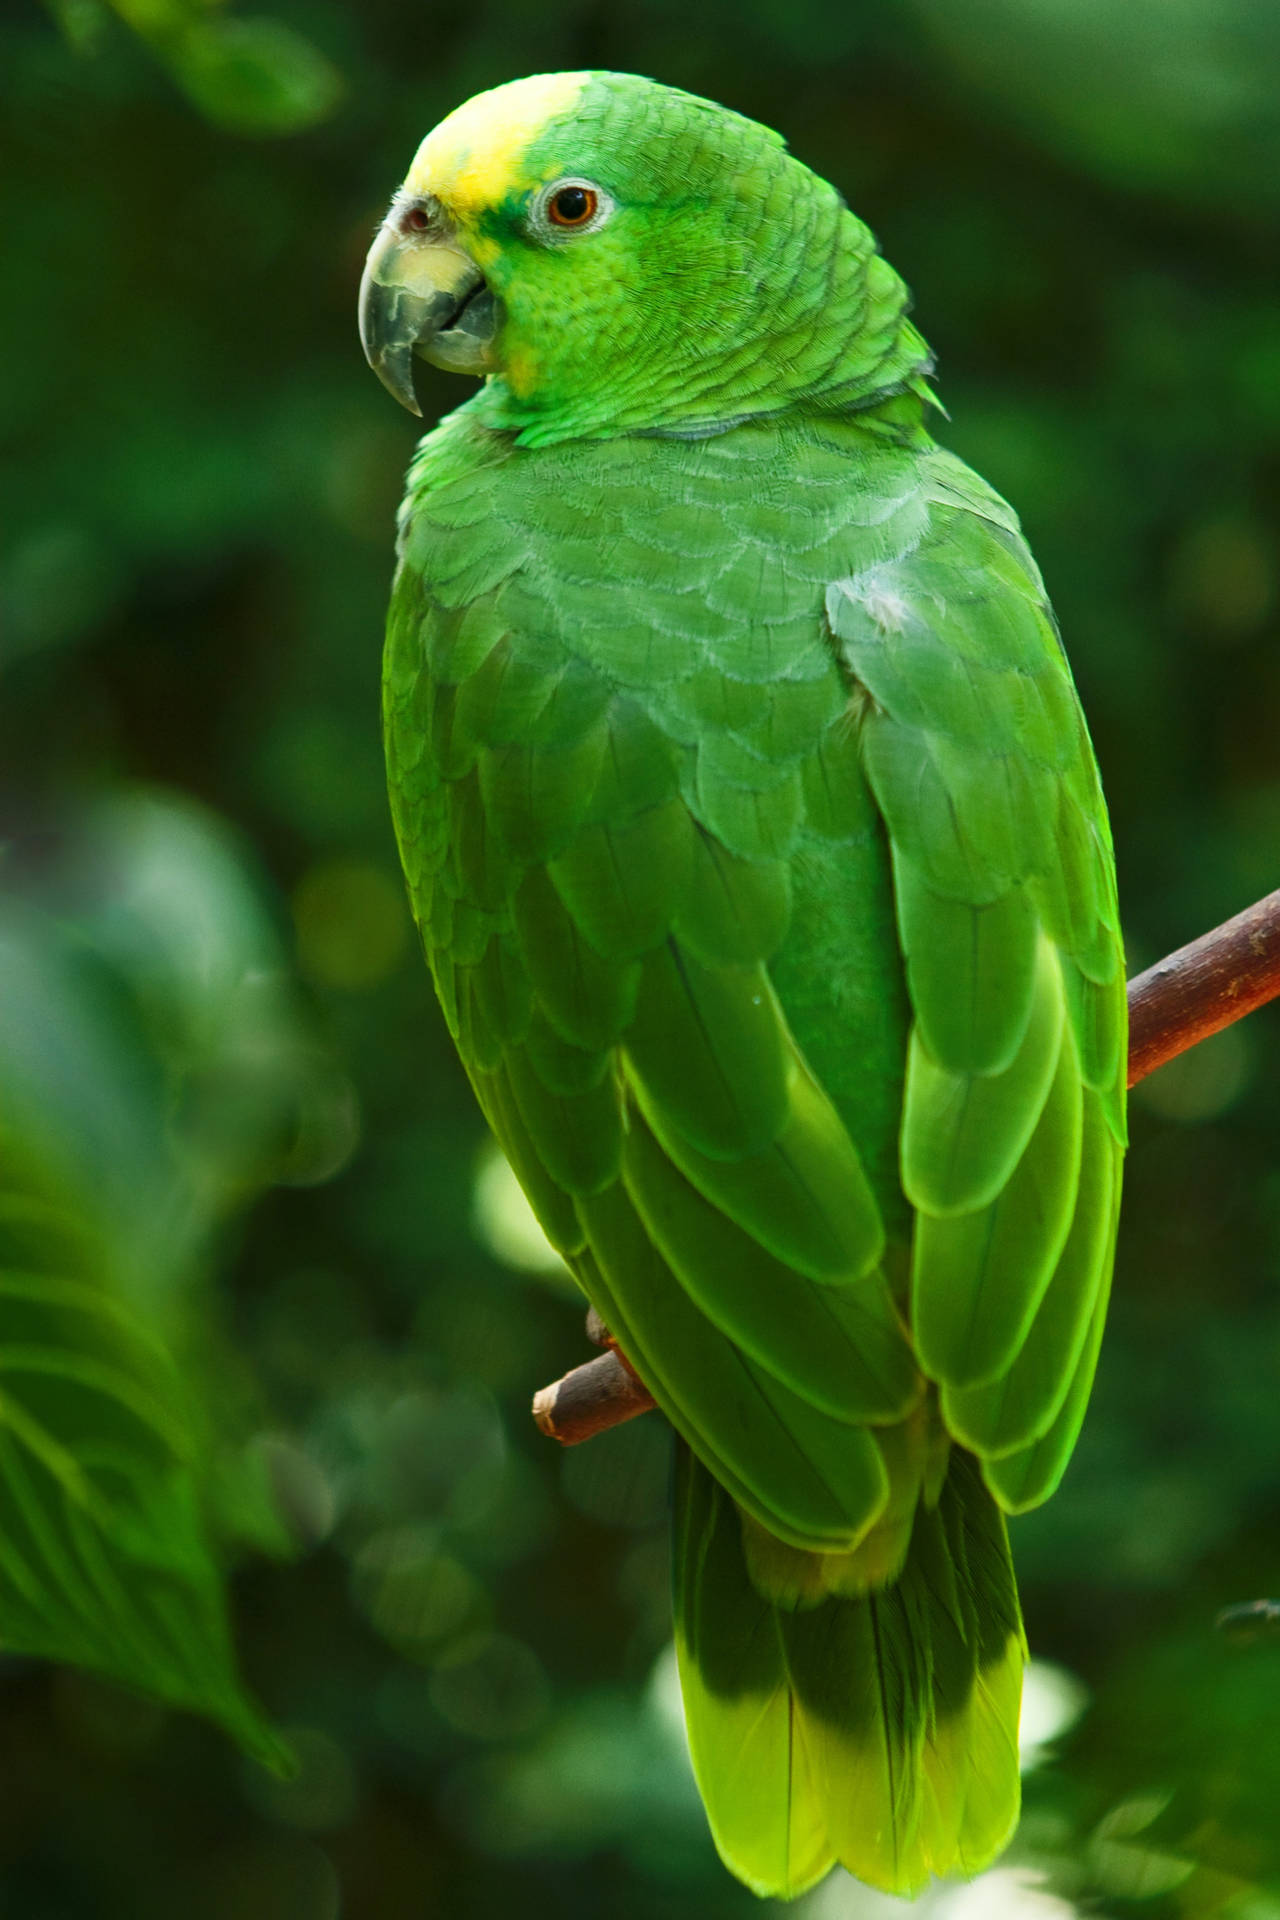 Caption: Vibrant Green Parrot In Hd Quality